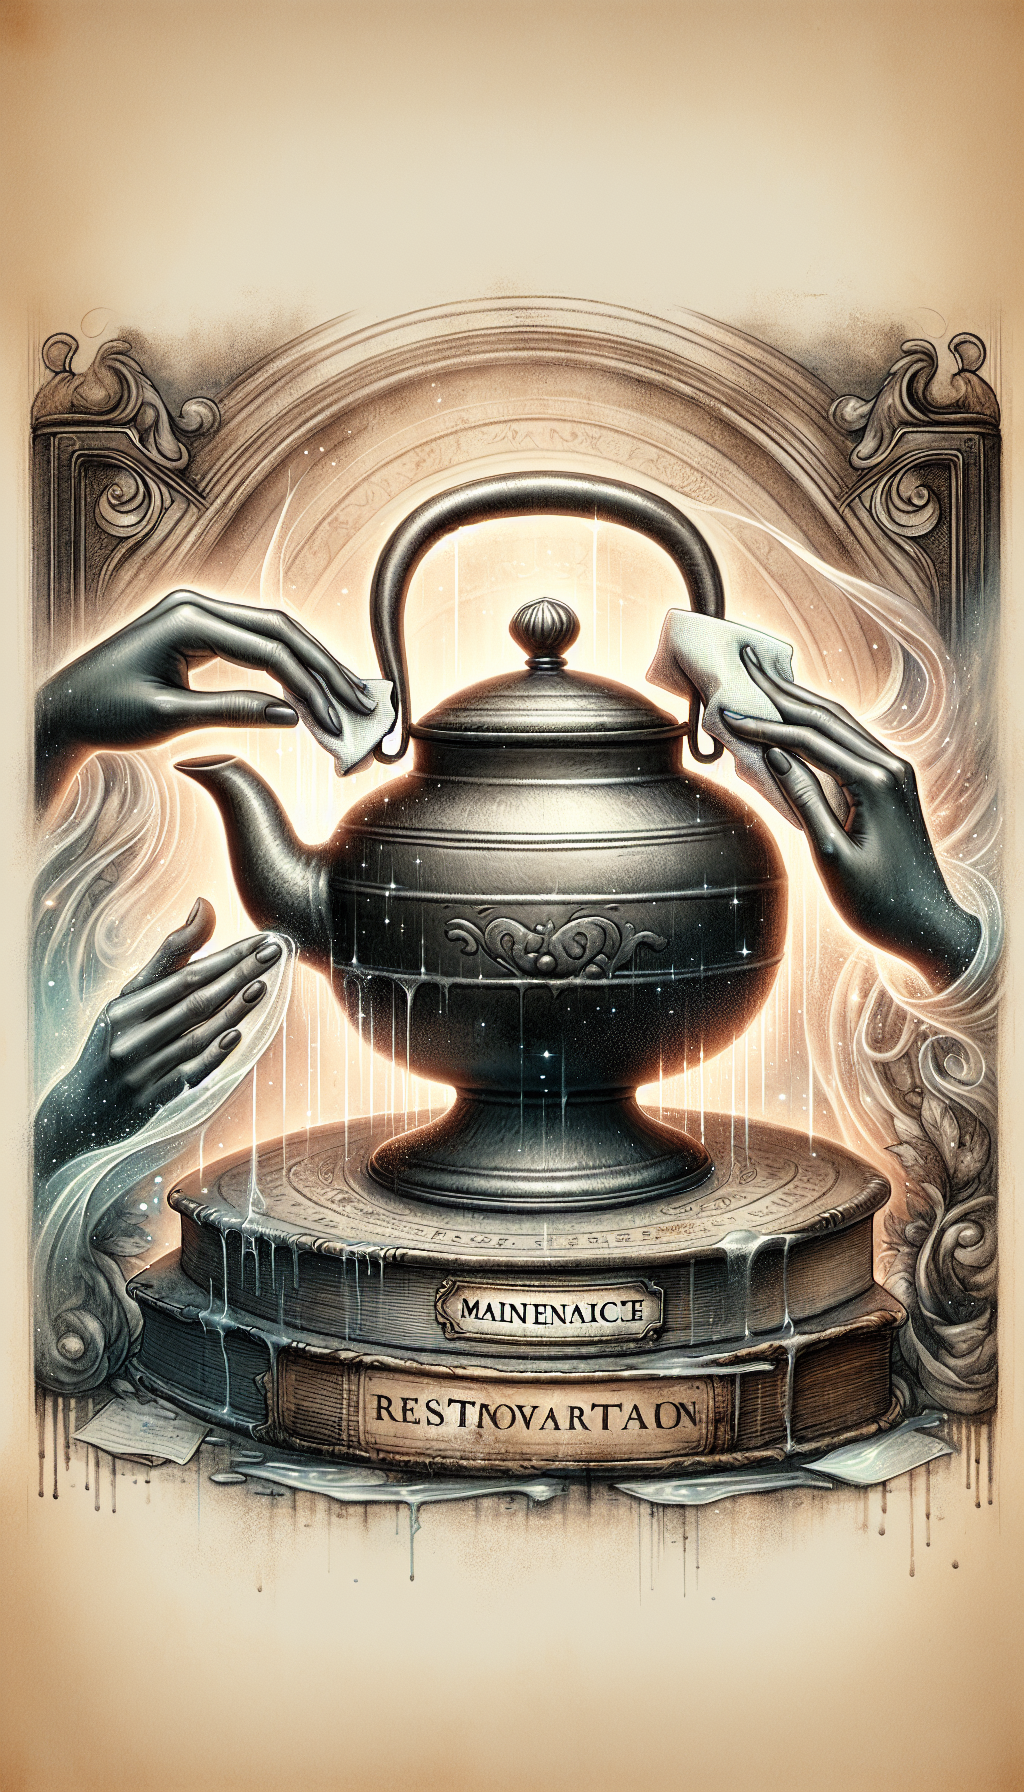 An illustration displaying a gleaming antique cast iron kettle taking center stage, with two ghosted hands gently polishing it using a soft cloth, one on each side. The kettle sits atop a pedestal of old books labeled 'Maintenance' and 'Restoration,' symbolizing knowledge as the foundation for preserving value. Soft, vintage hues reinforce the theme of timeless worth.